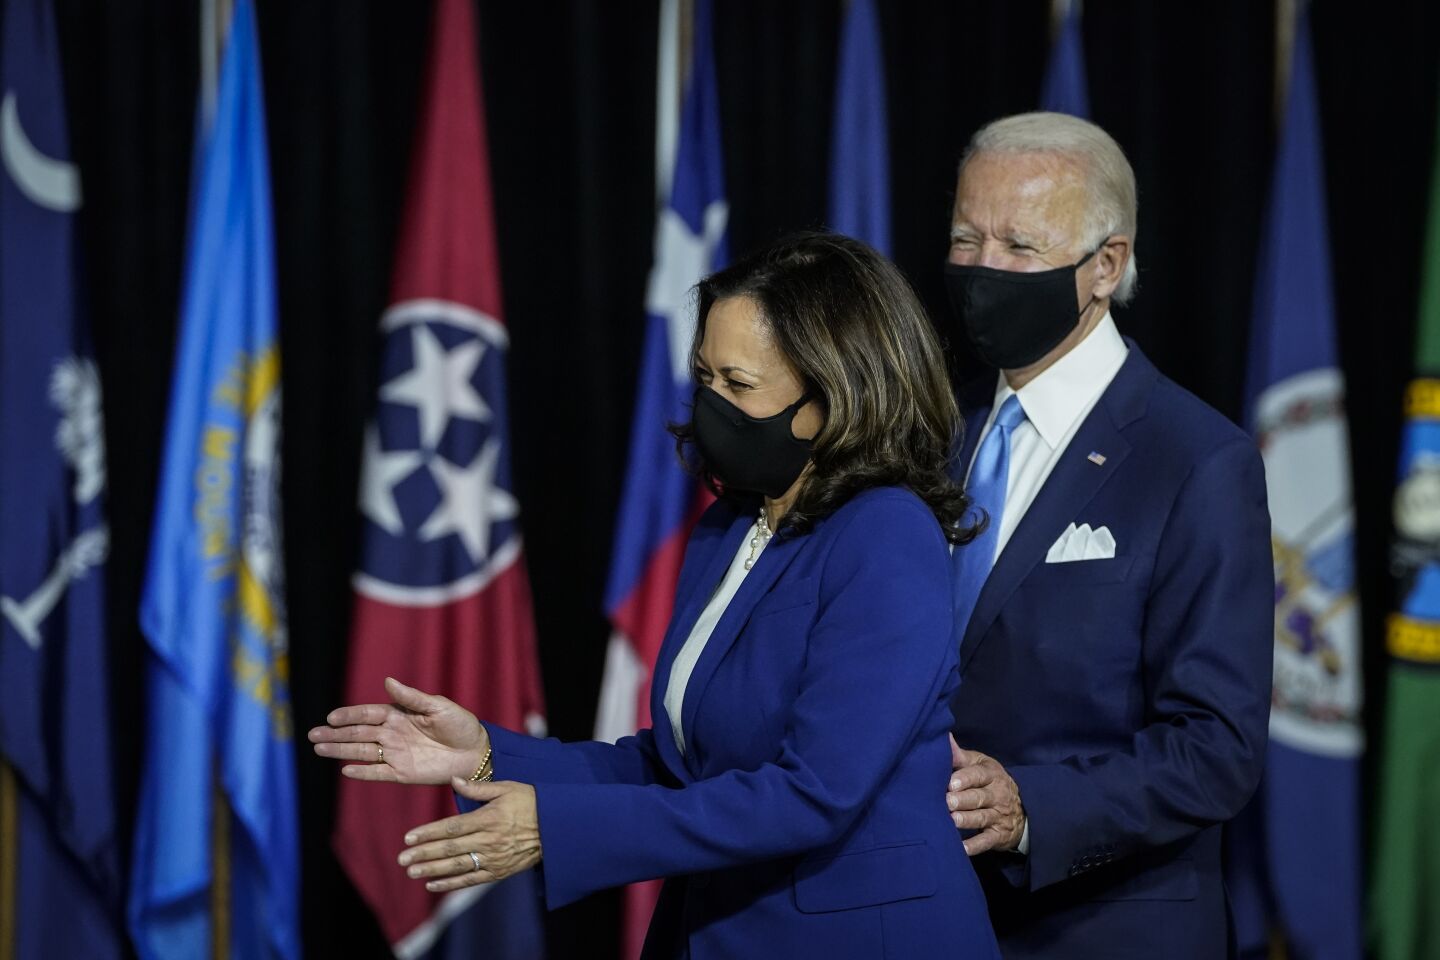 The candidates arrived wearing masks.